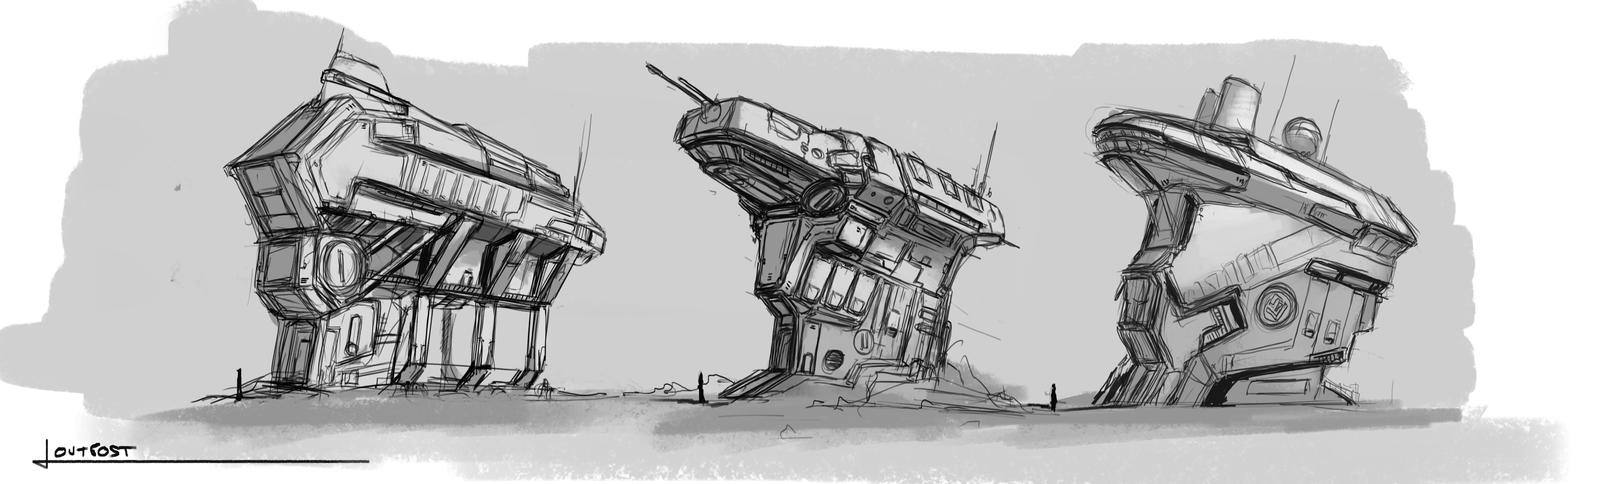 outpost concepts